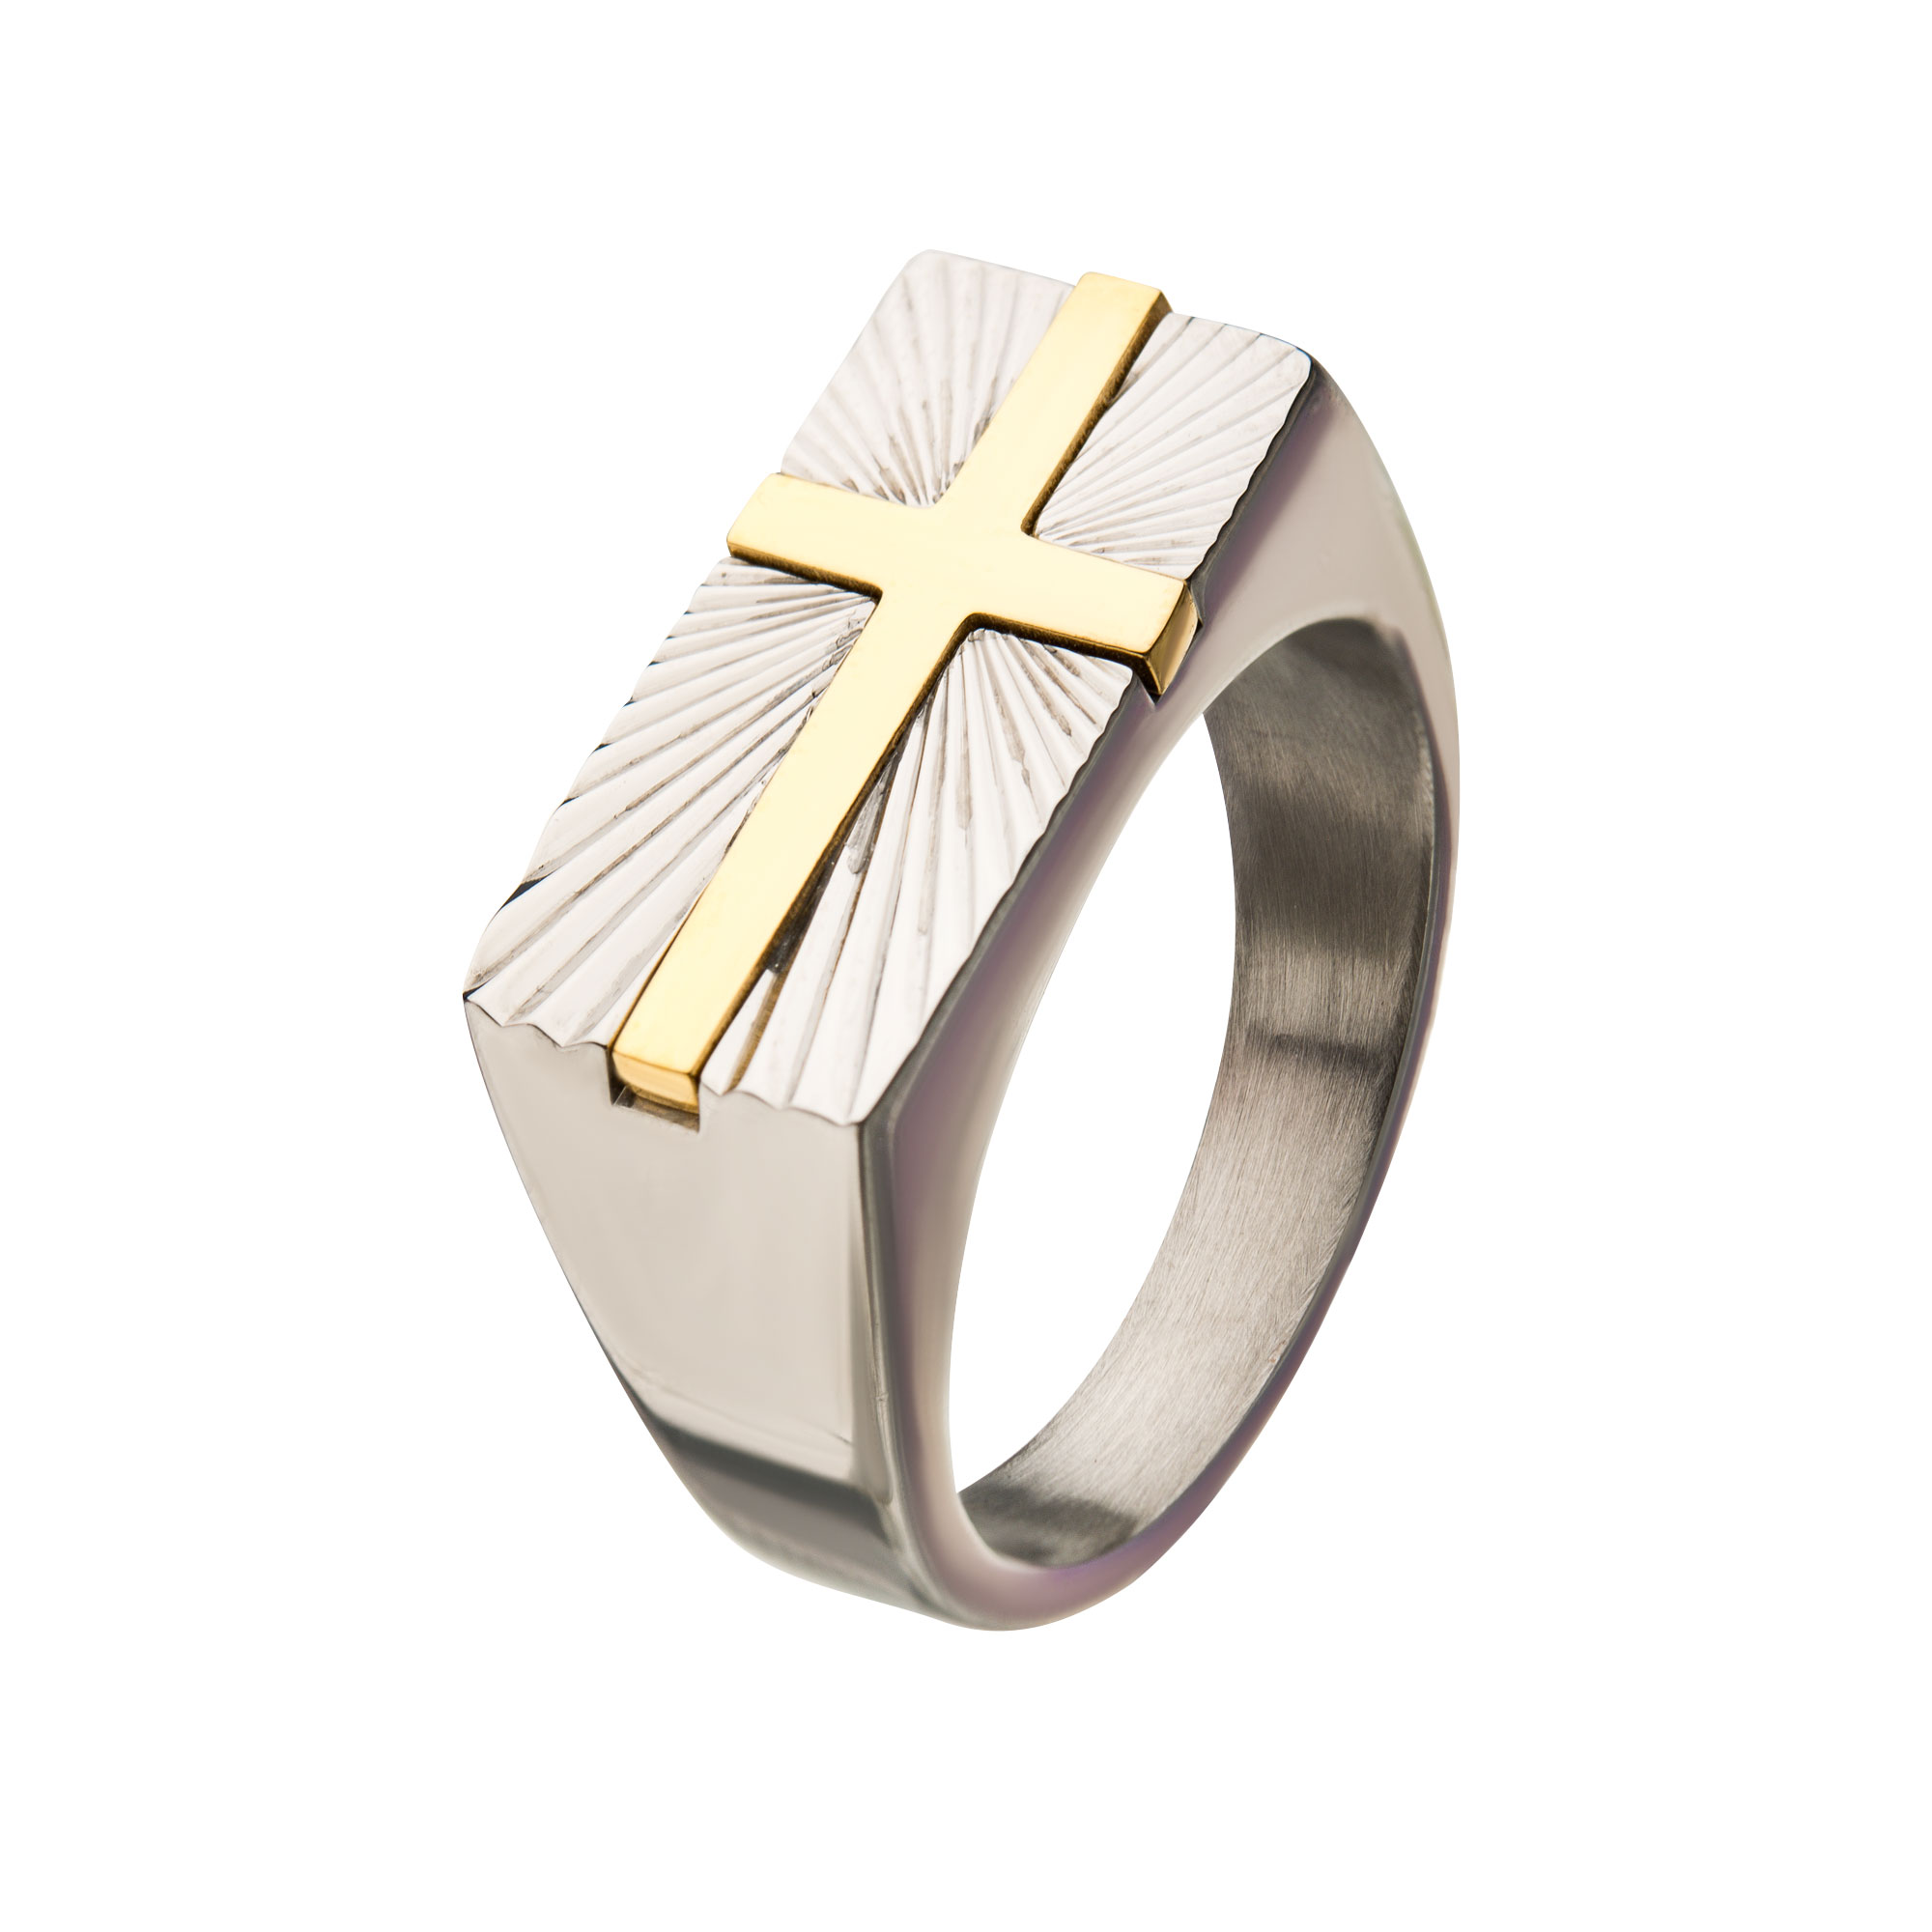 Stainless Steel with  Gold Plated Transfiguration Cross Ring K. Martin Jeweler Dodge City, KS